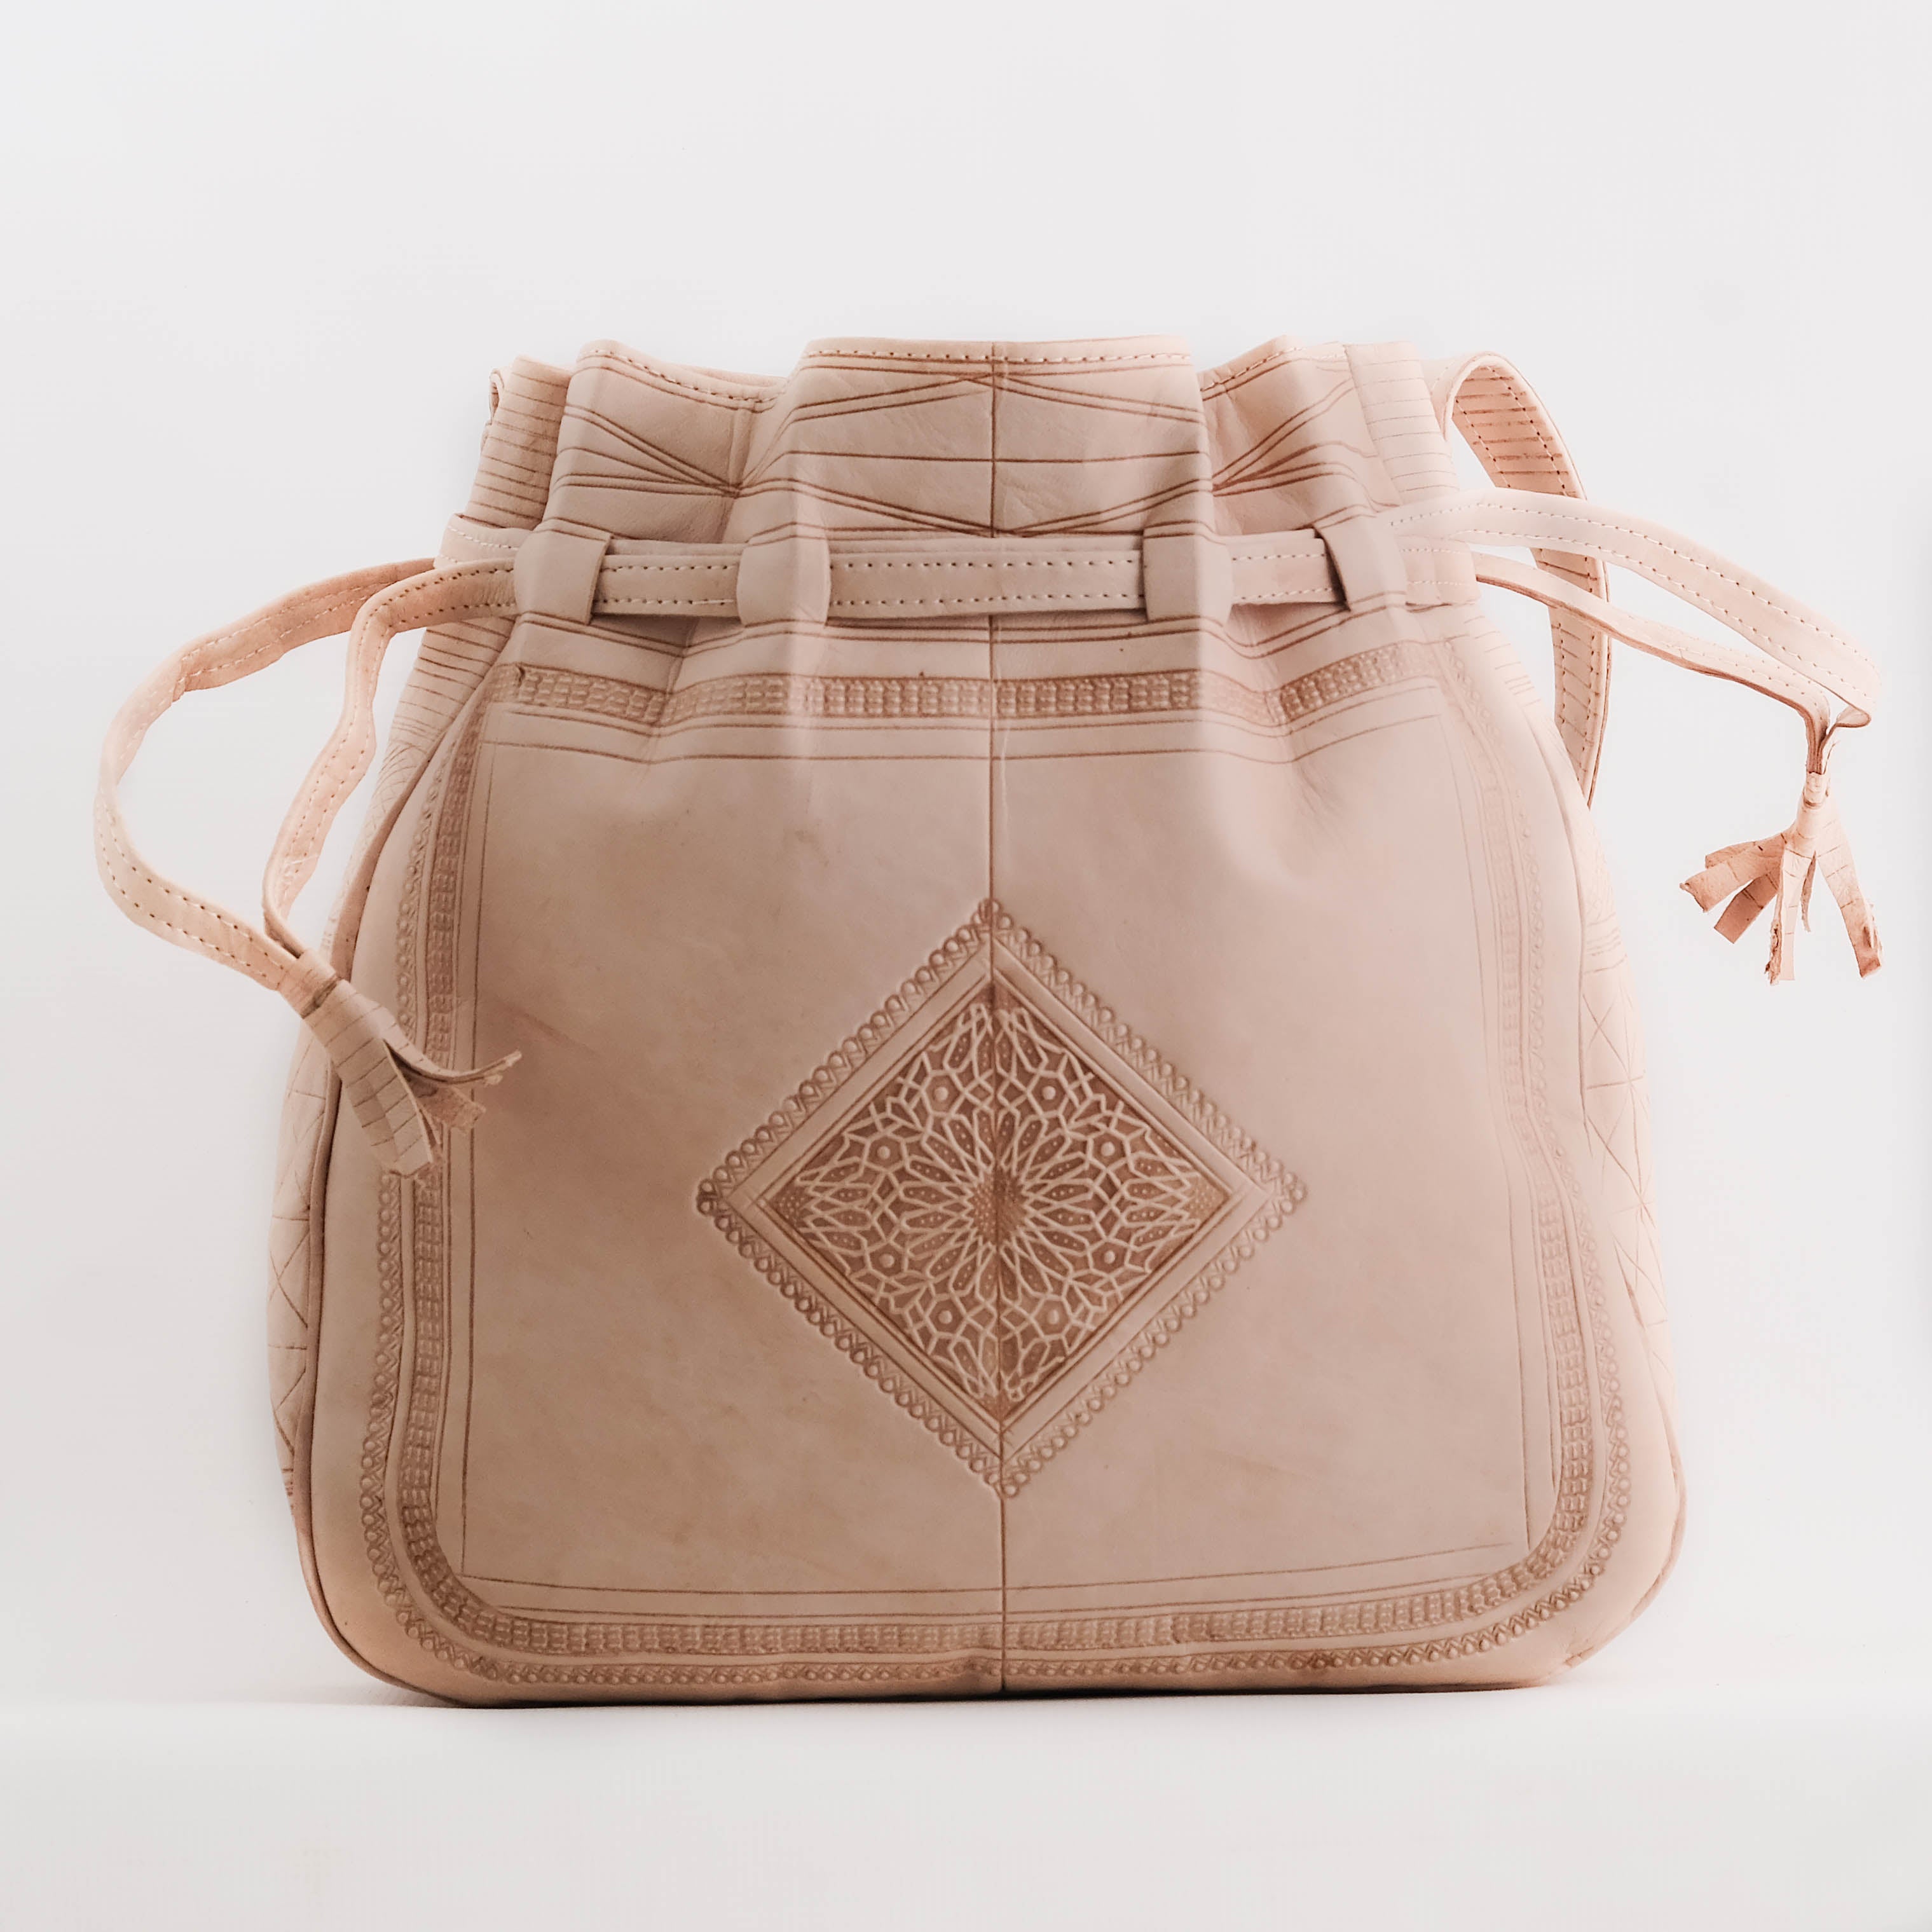 Moroccan leather bag White